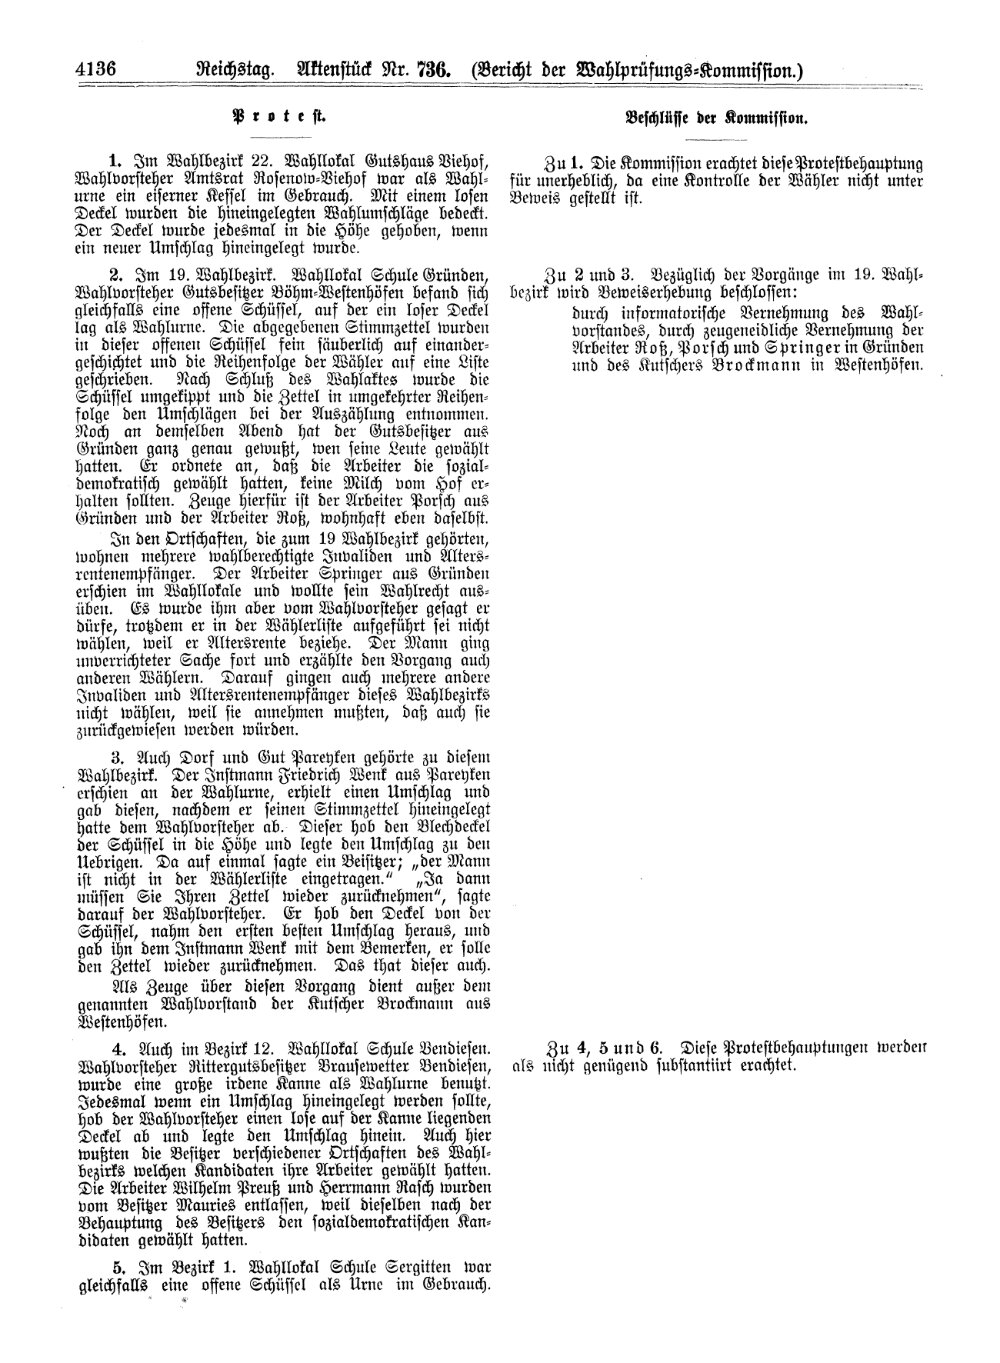 Scan of page 4136